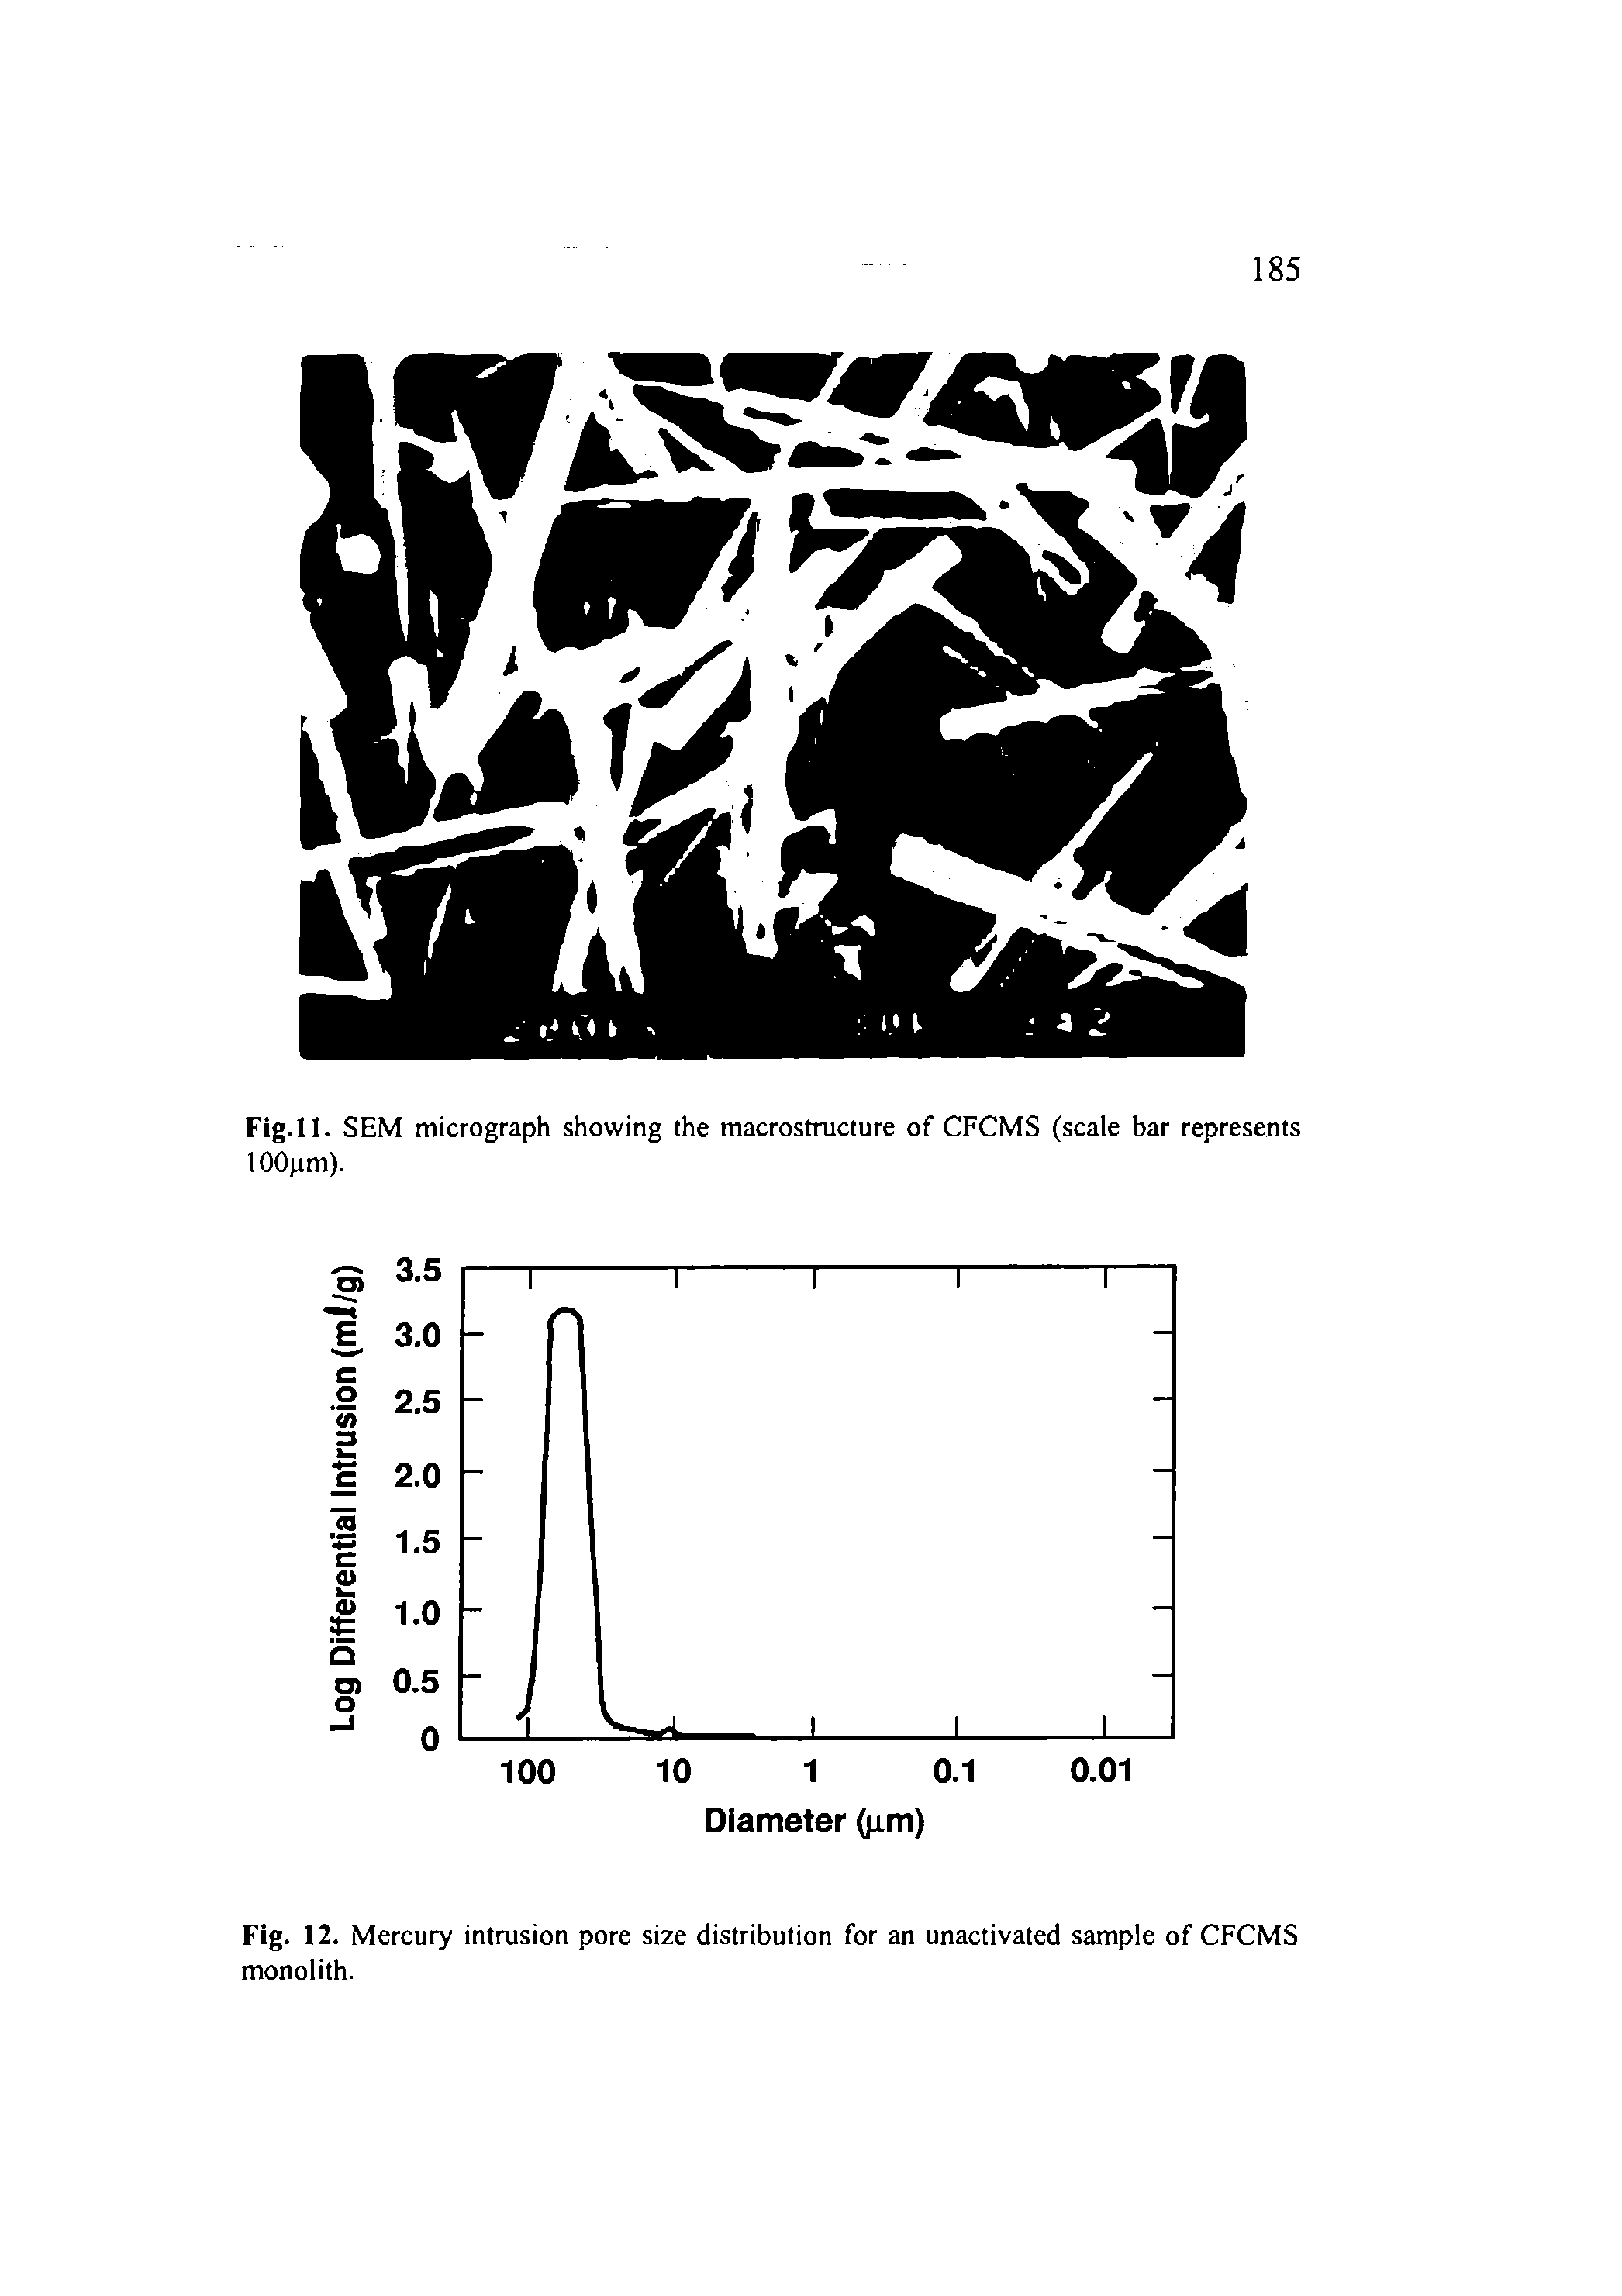 Fig. 12. Mercury intrusion pore size distribution for an unactivated sample of CFCMS monolith.